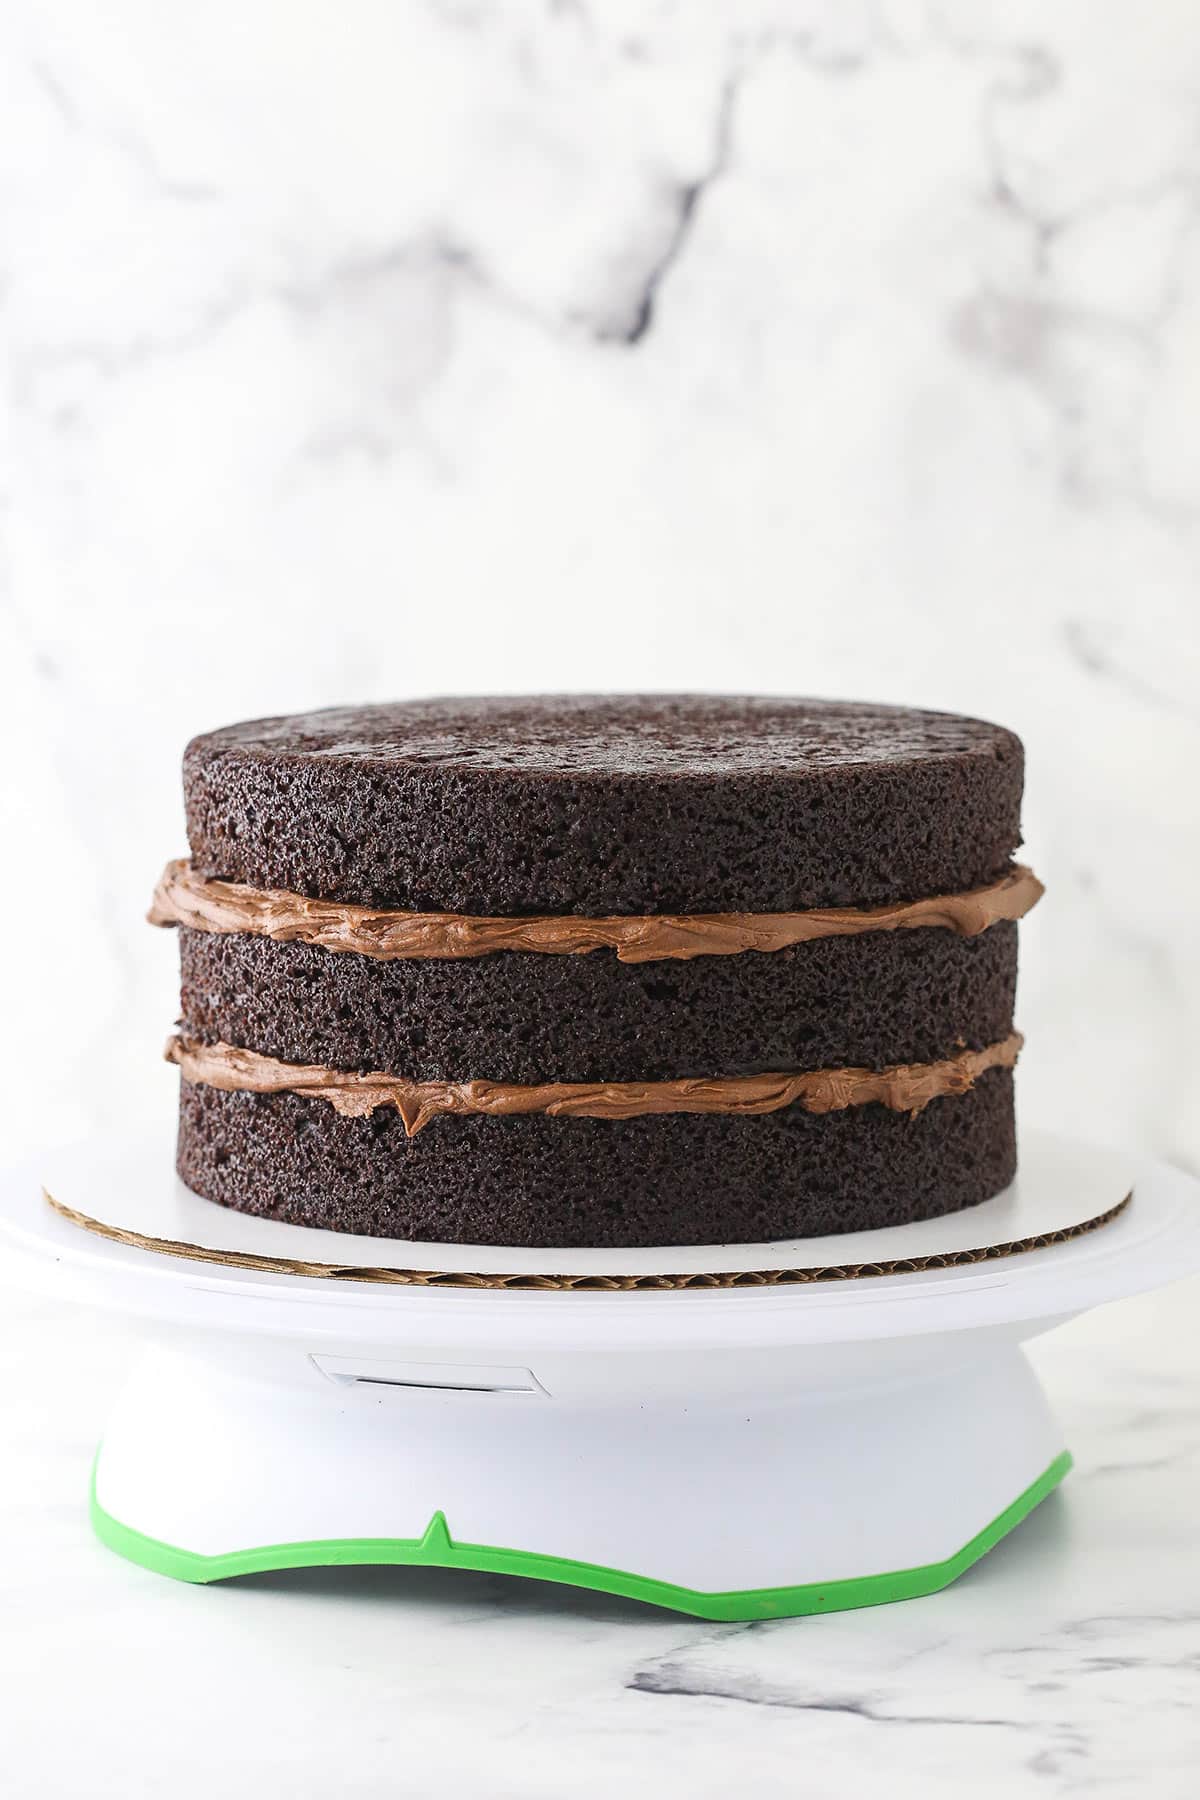 3 layers of chocolate cake on a cake stand with frosting in between each layer